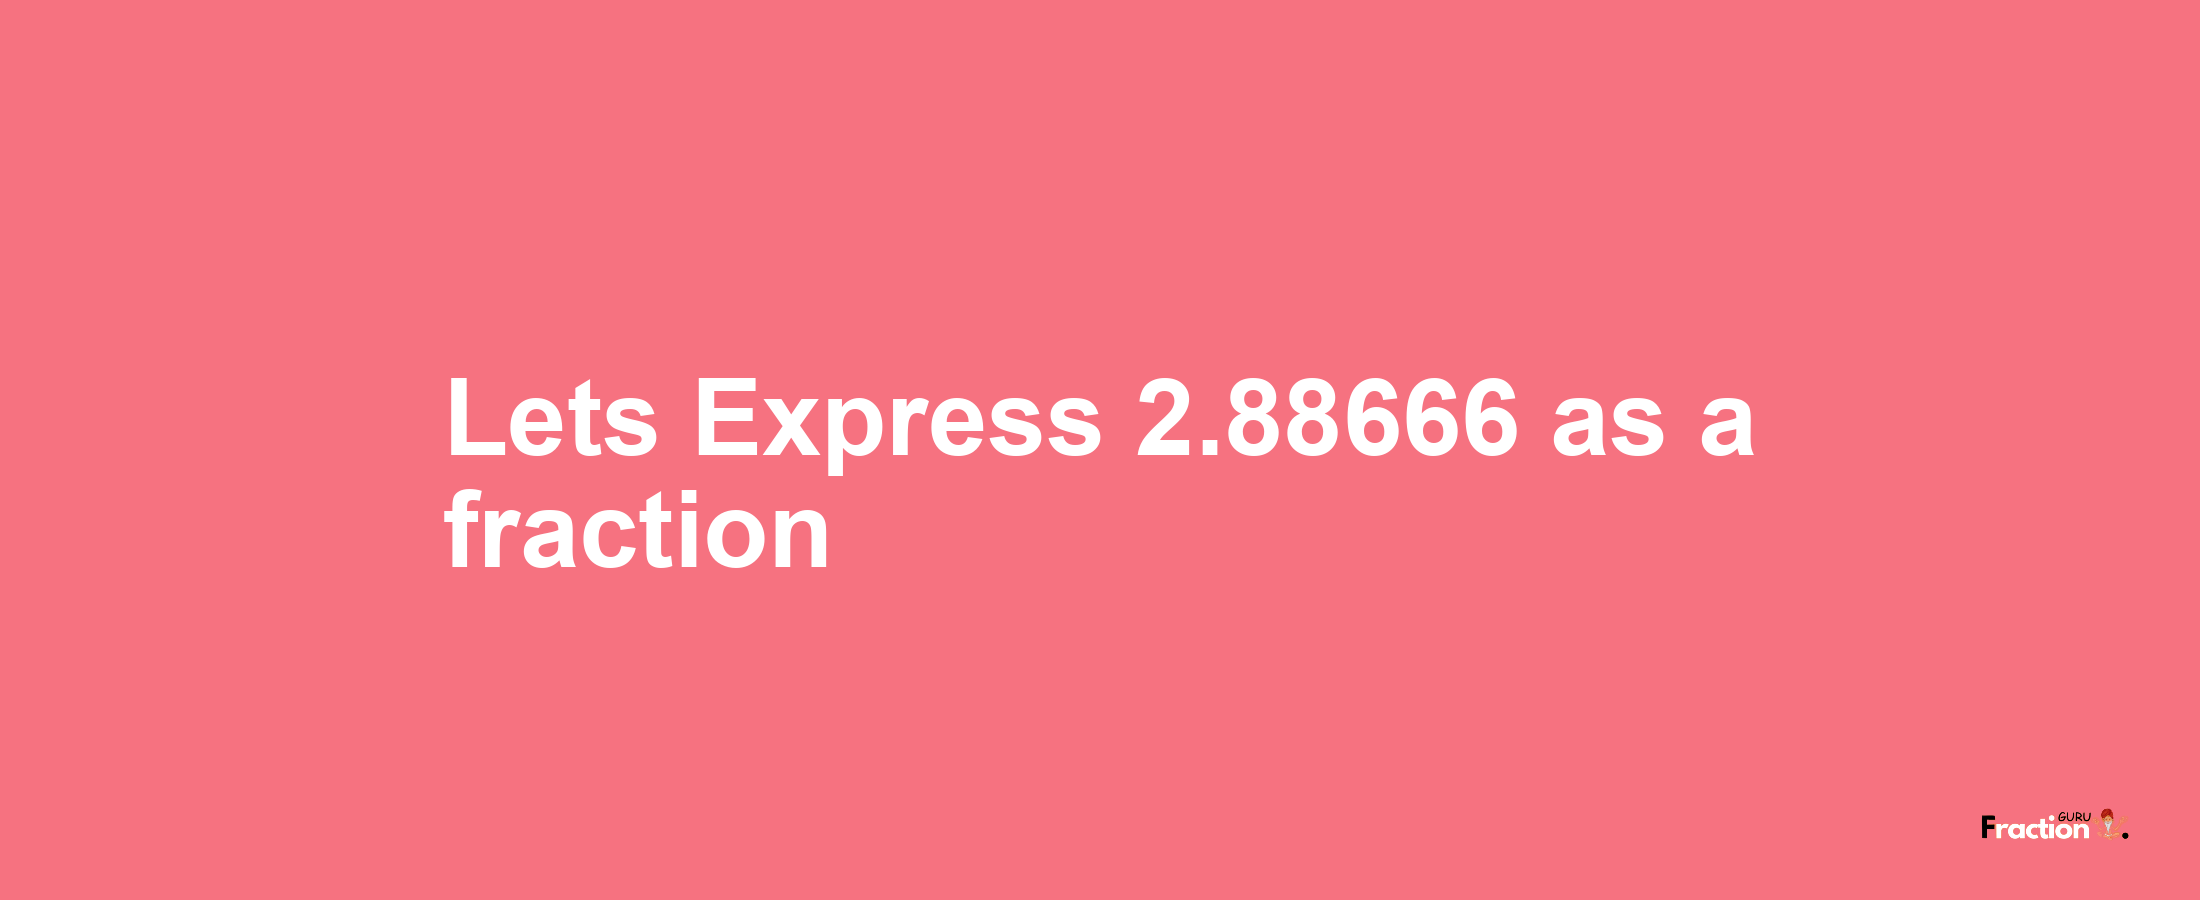 Lets Express 2.88666 as afraction